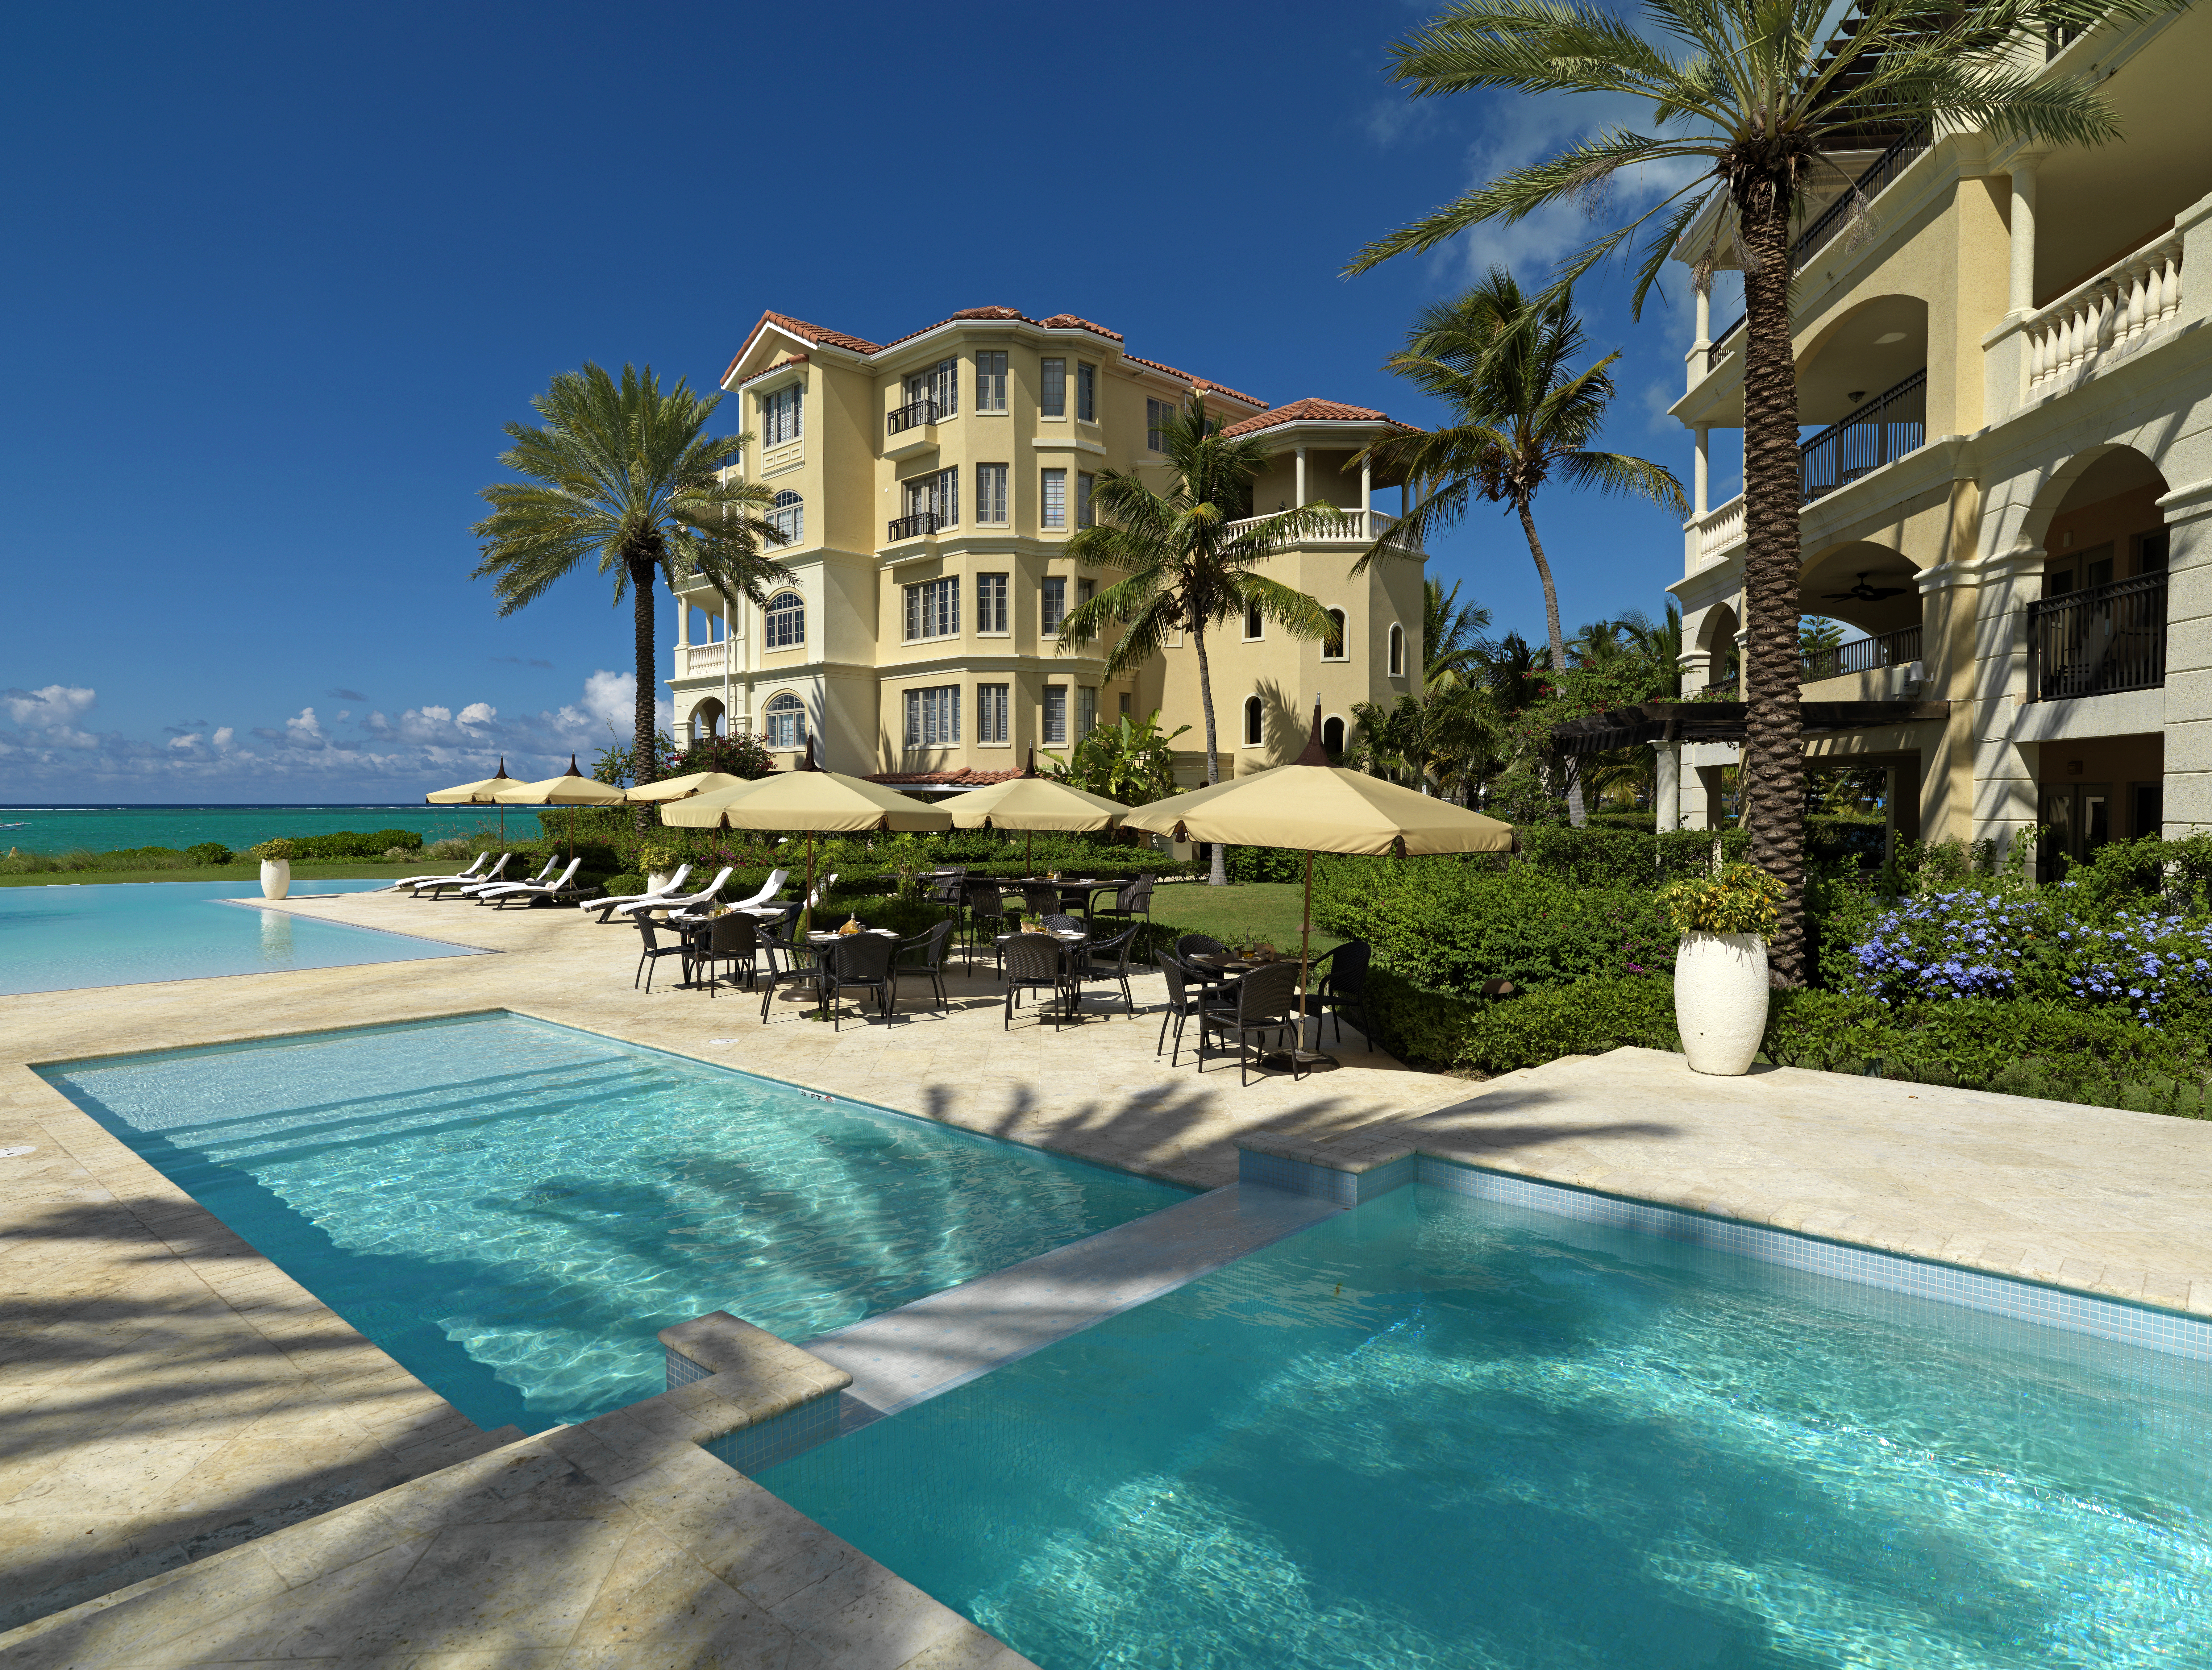 Architecture Building Hotel Ocean Palm Tree Pool Turks And Caicos 7168x5412